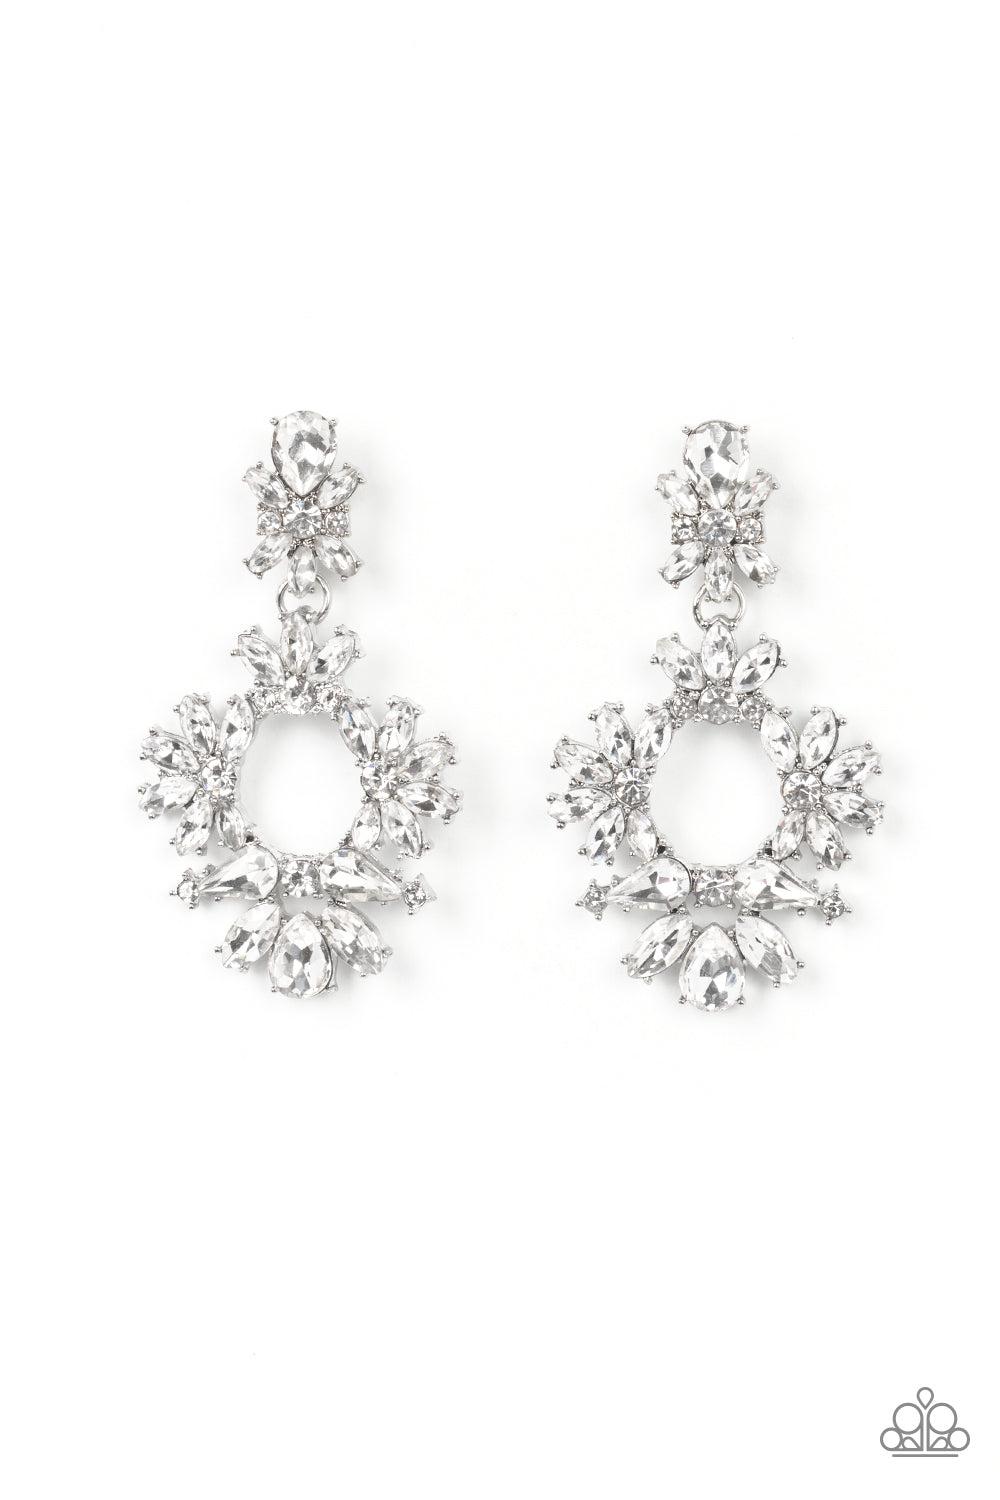 Paparazzi Leave them Speechless - White Earrings - June 2022 Life Of The Party Exclusive - A Finishing Touch Jewelry